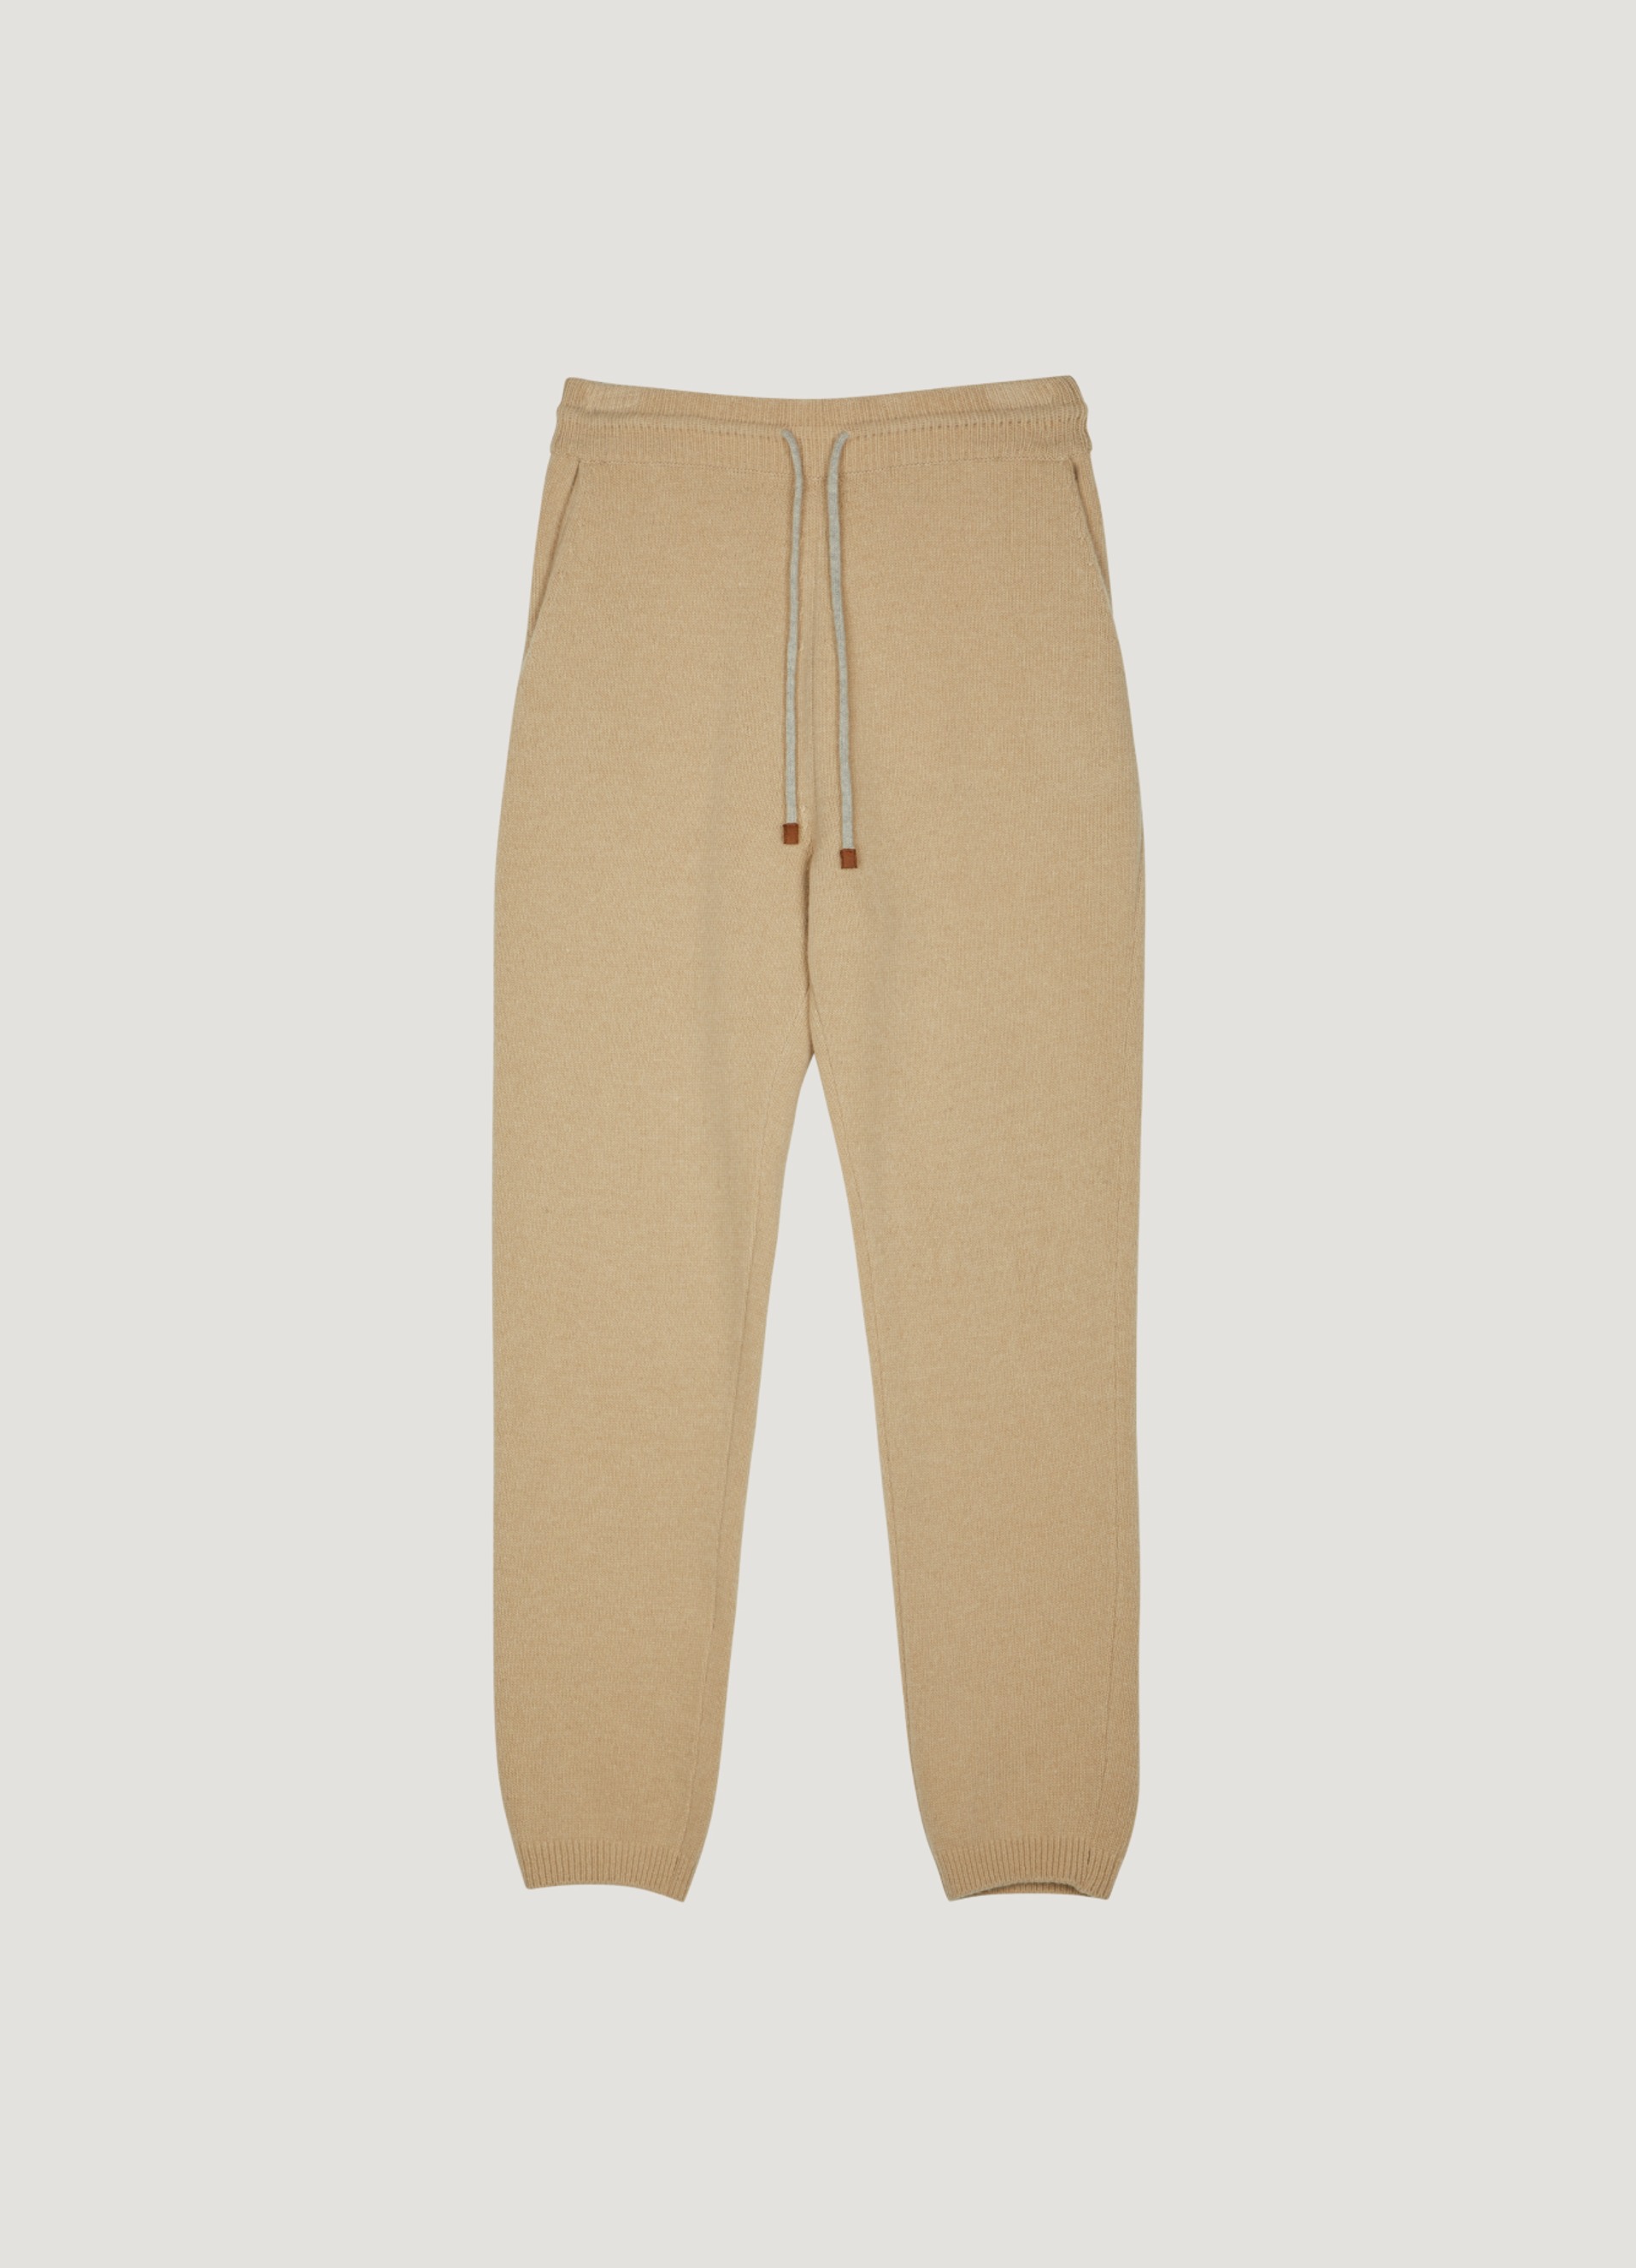 Cashmere Blend Knit Pants (Beige) Out of Stock